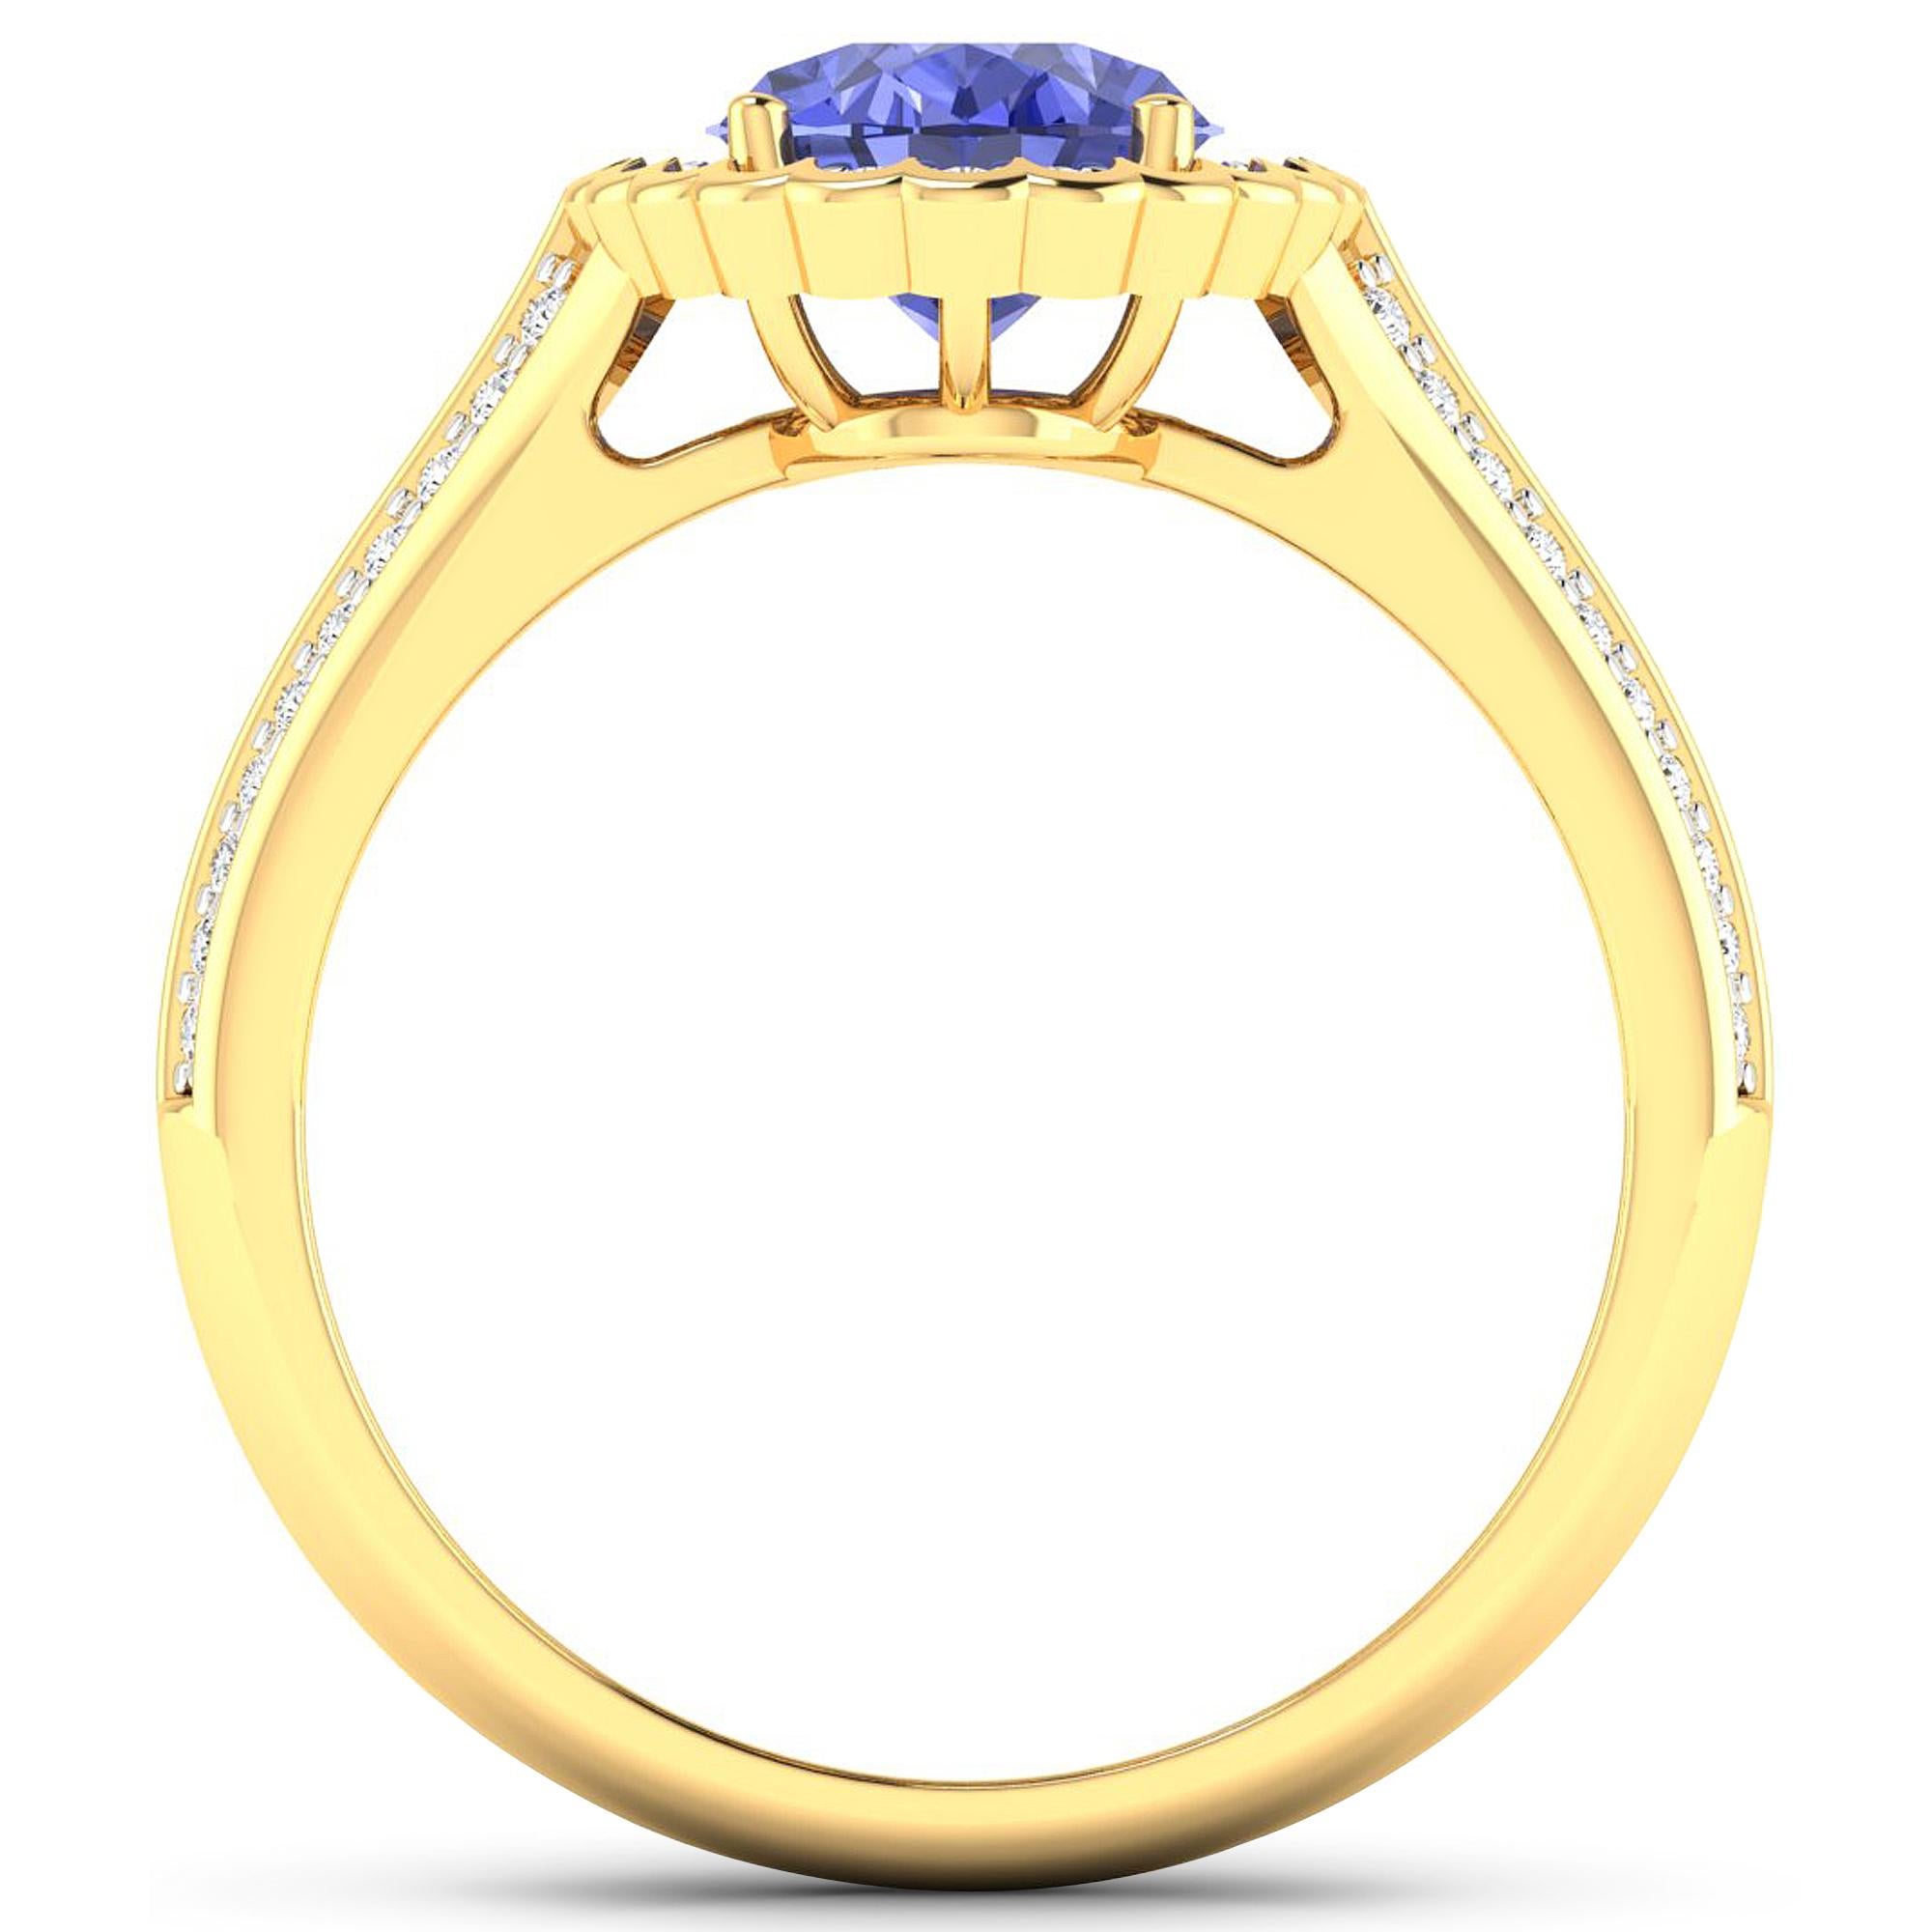 Tanzanite Gold Ring, 14Kt Gold Tanzanite & Diamond Engagement Ring, 2.02ctw.

Flaunt yourself with this 14K Yellow Gold Tanzanite & White Diamond Engagement Ring. The setting is inlaid with 62 accented full-cut White Diamond round stones for a total